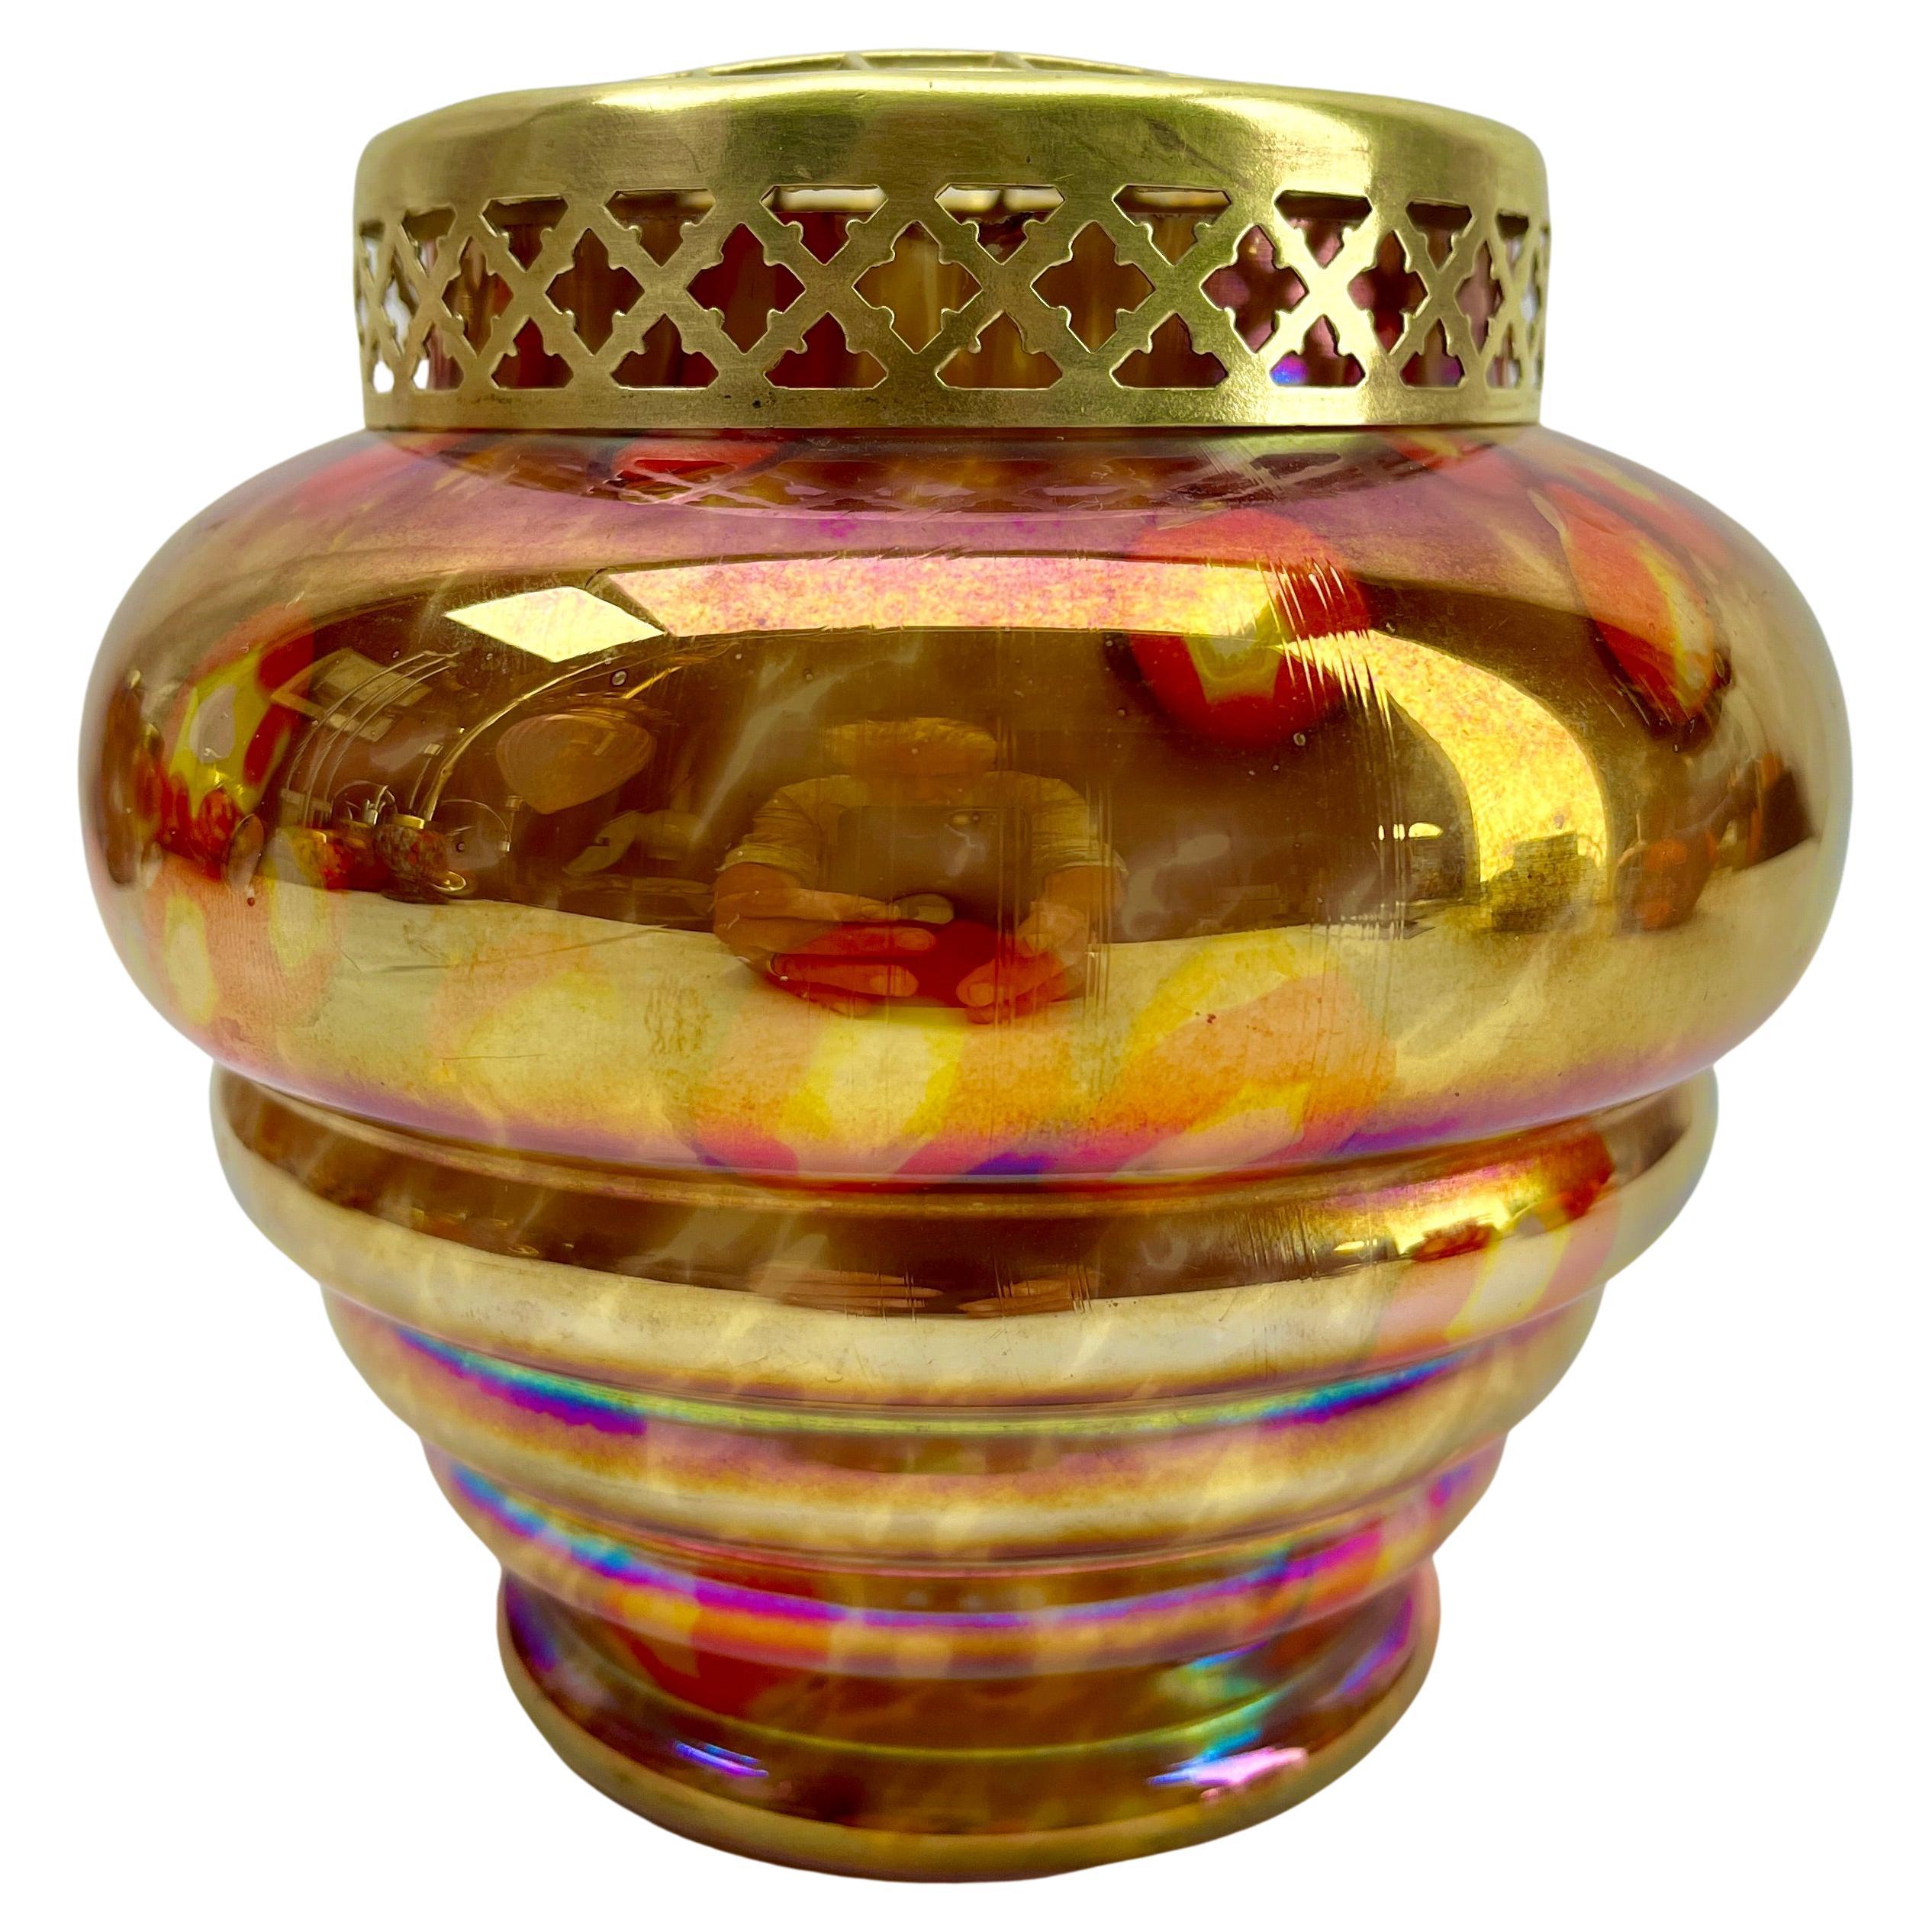 'Pique Fleurs' Iridescent Glass Vase, in Multi Color Decor with Grille, 1930s  For Sale